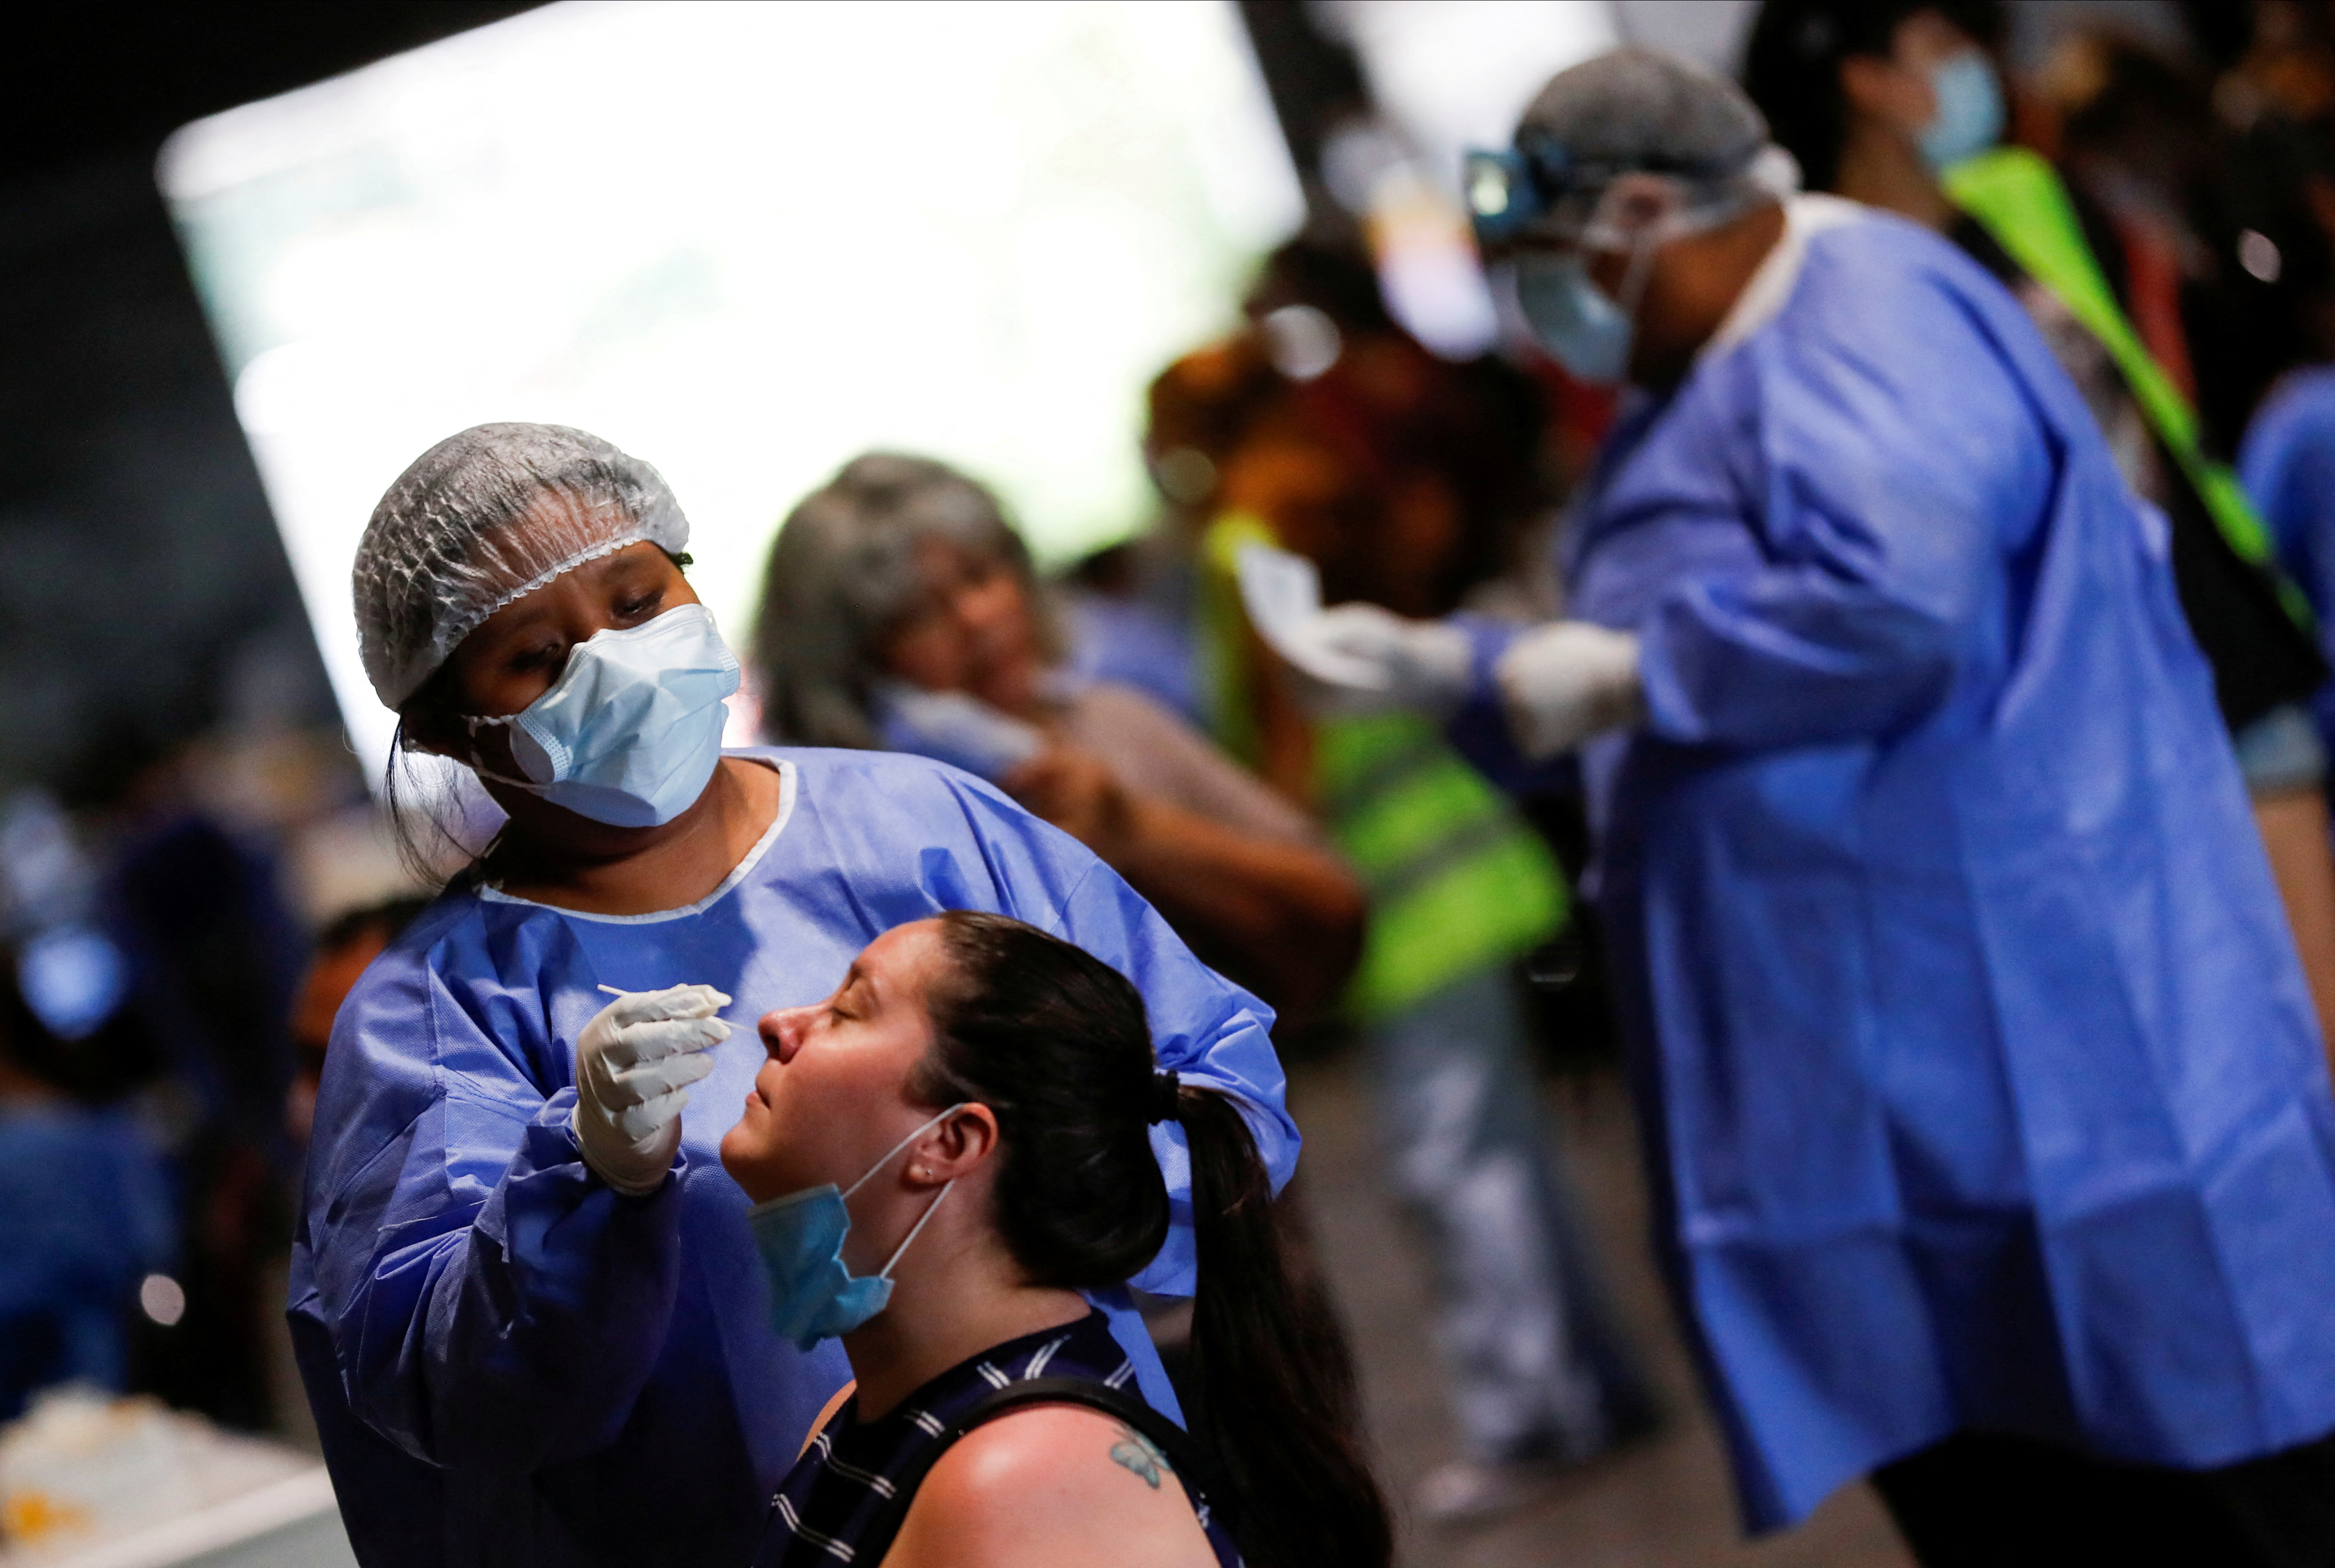 FILE PHOTO: A healthcare worker takes a swab sample from a woman to be tested for coronavirus disease (COVID-19) at La Rural, Buenos Aires, December 23, 2021.  The photo was taken on December 23, 2021.  REUTERS/Agustin Marcarian/File Photo